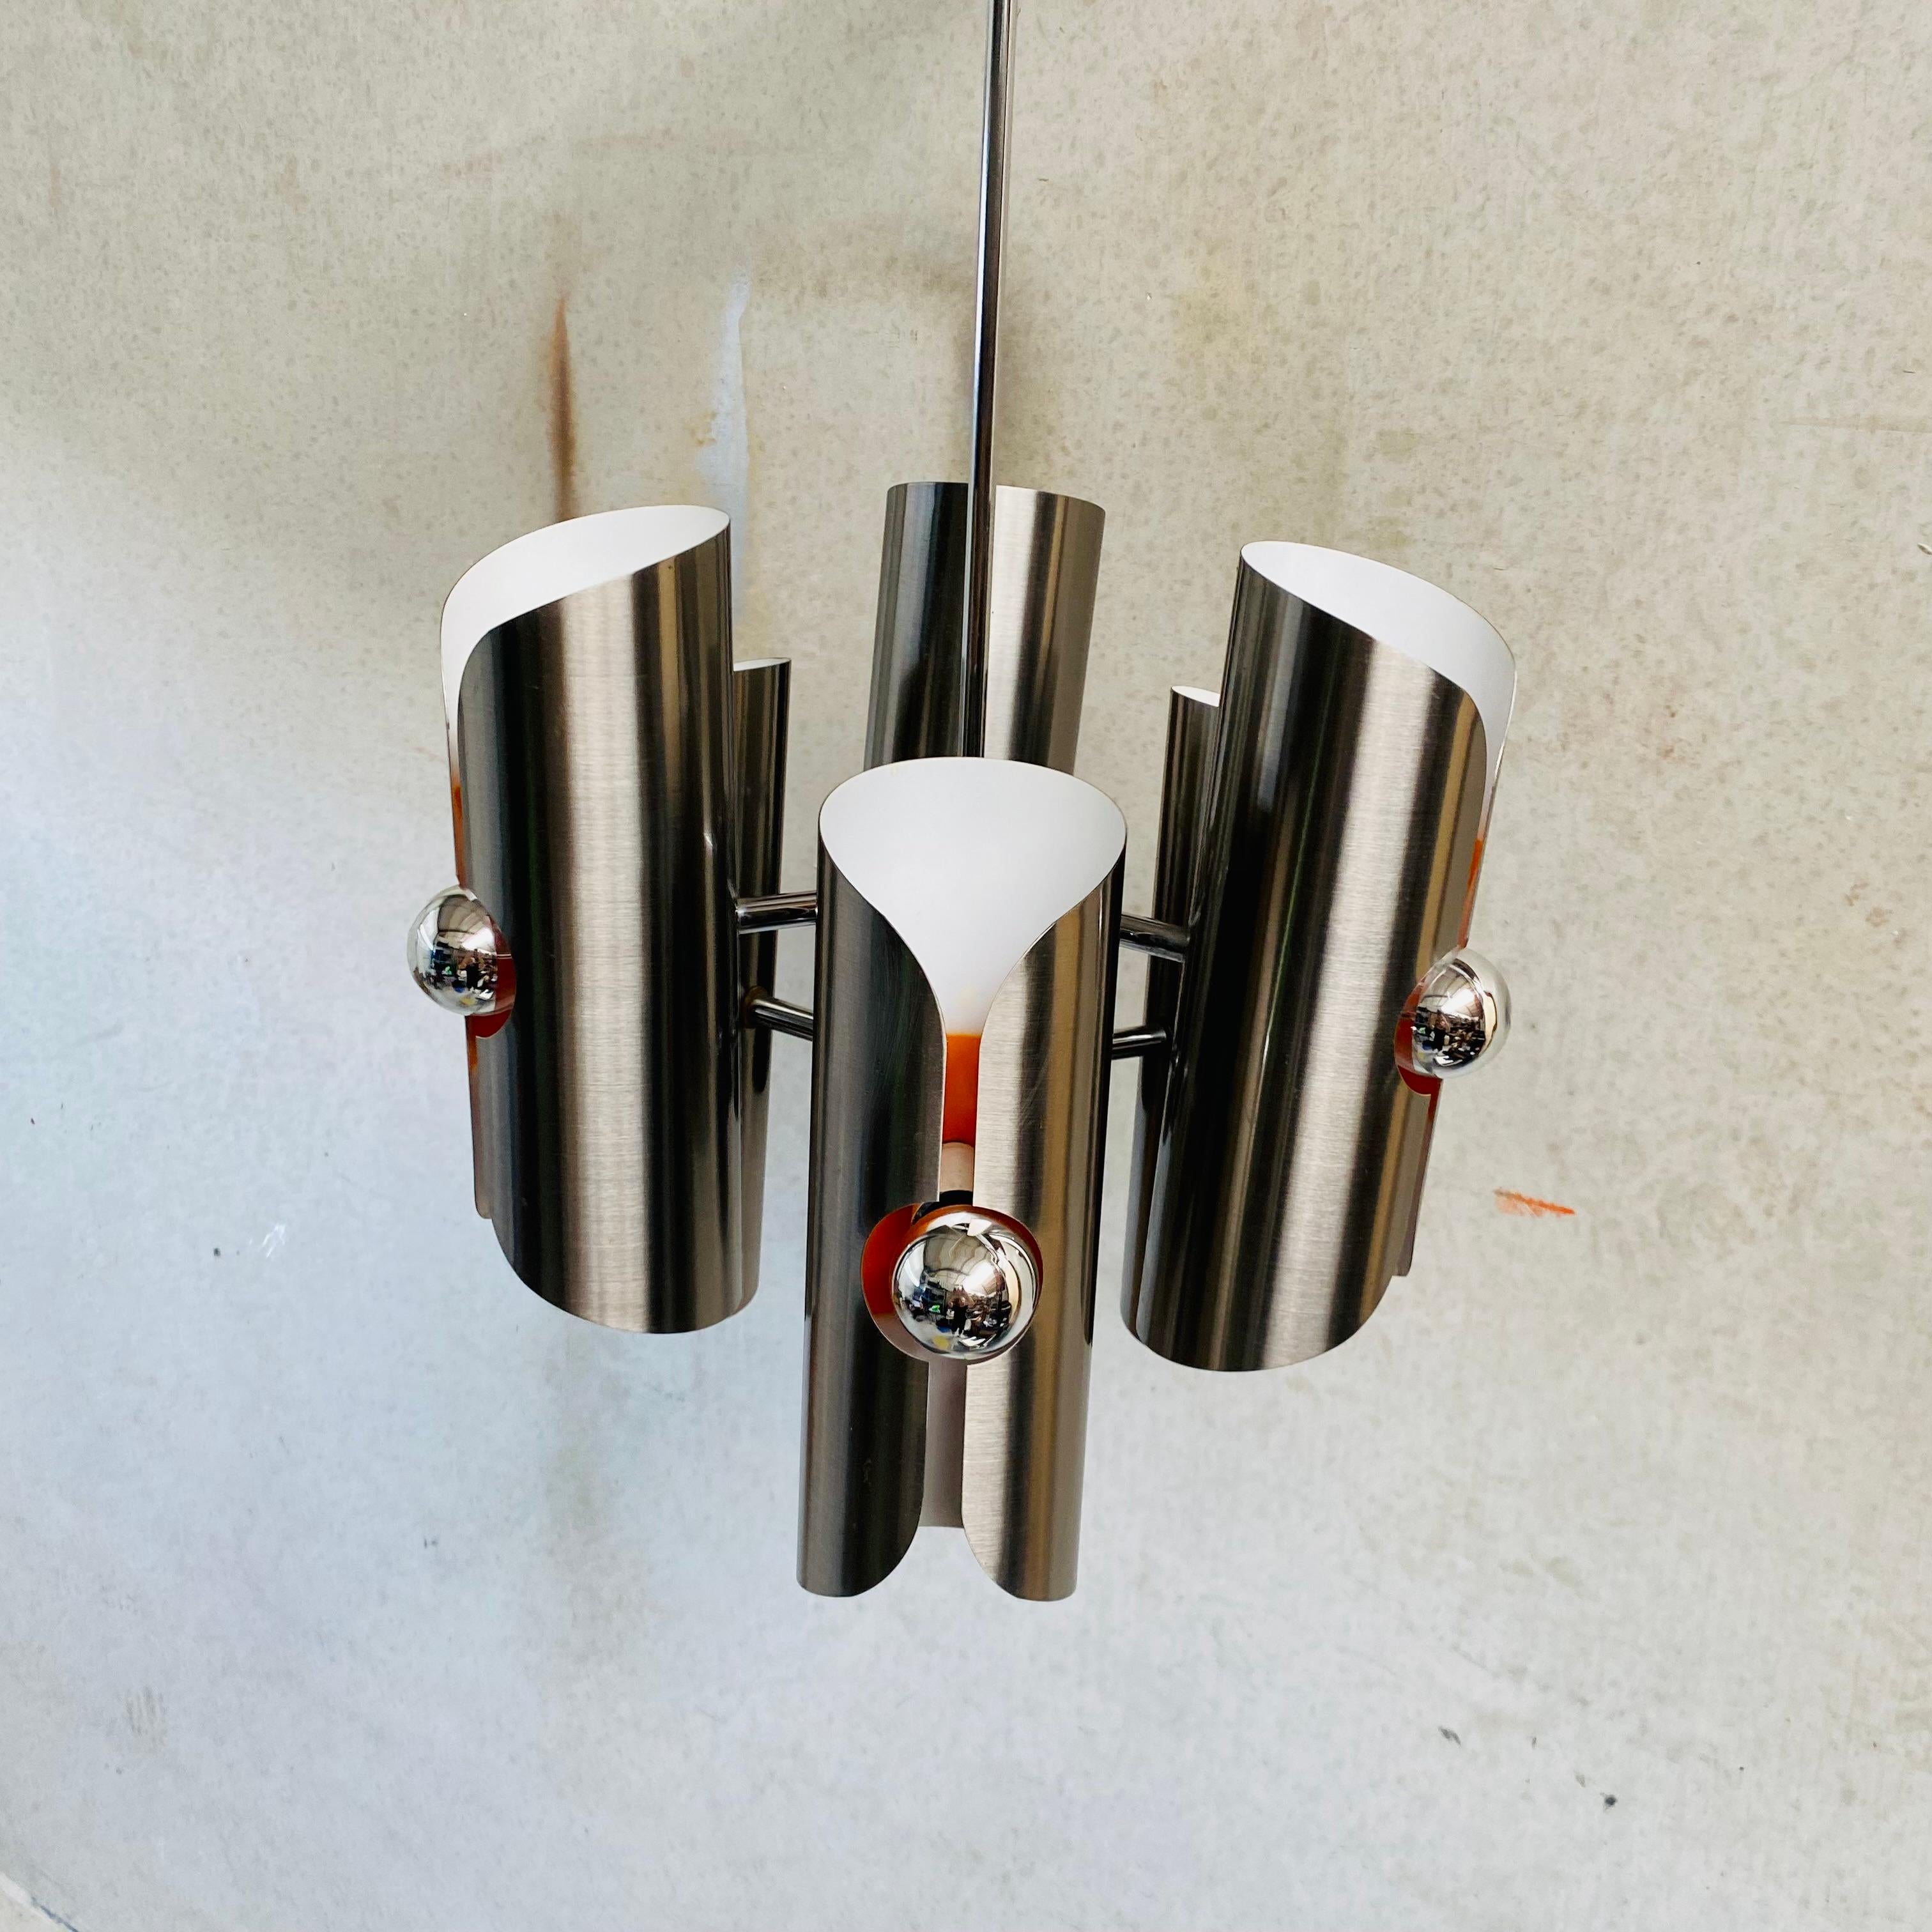 Polam Chandelier: A Timeless Statement Piece 1970

Transport yourself back to the glamorous 1970s with this captivating chandelier from Polam. Crafted with a sleek chrome frame, it exudes a distinctive charm that's perfect for elevating your